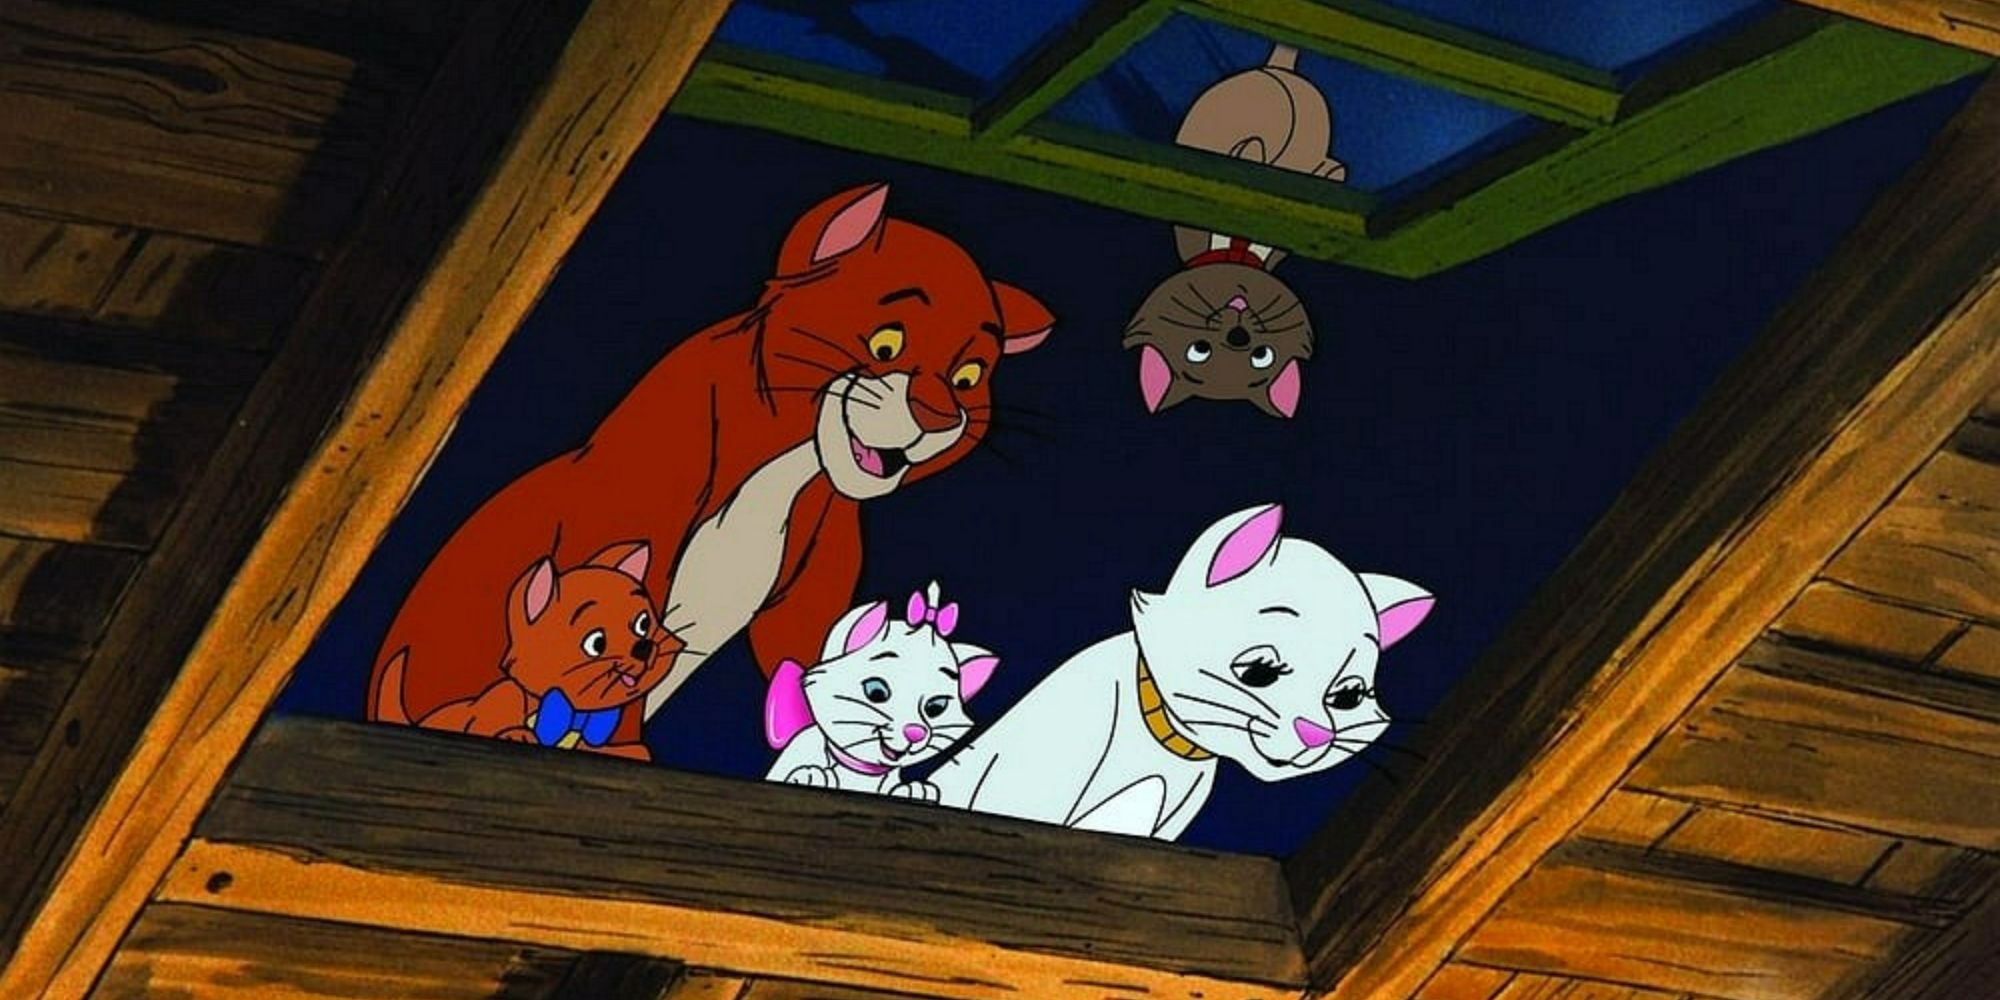 The cats looking through a window in The Aristocats